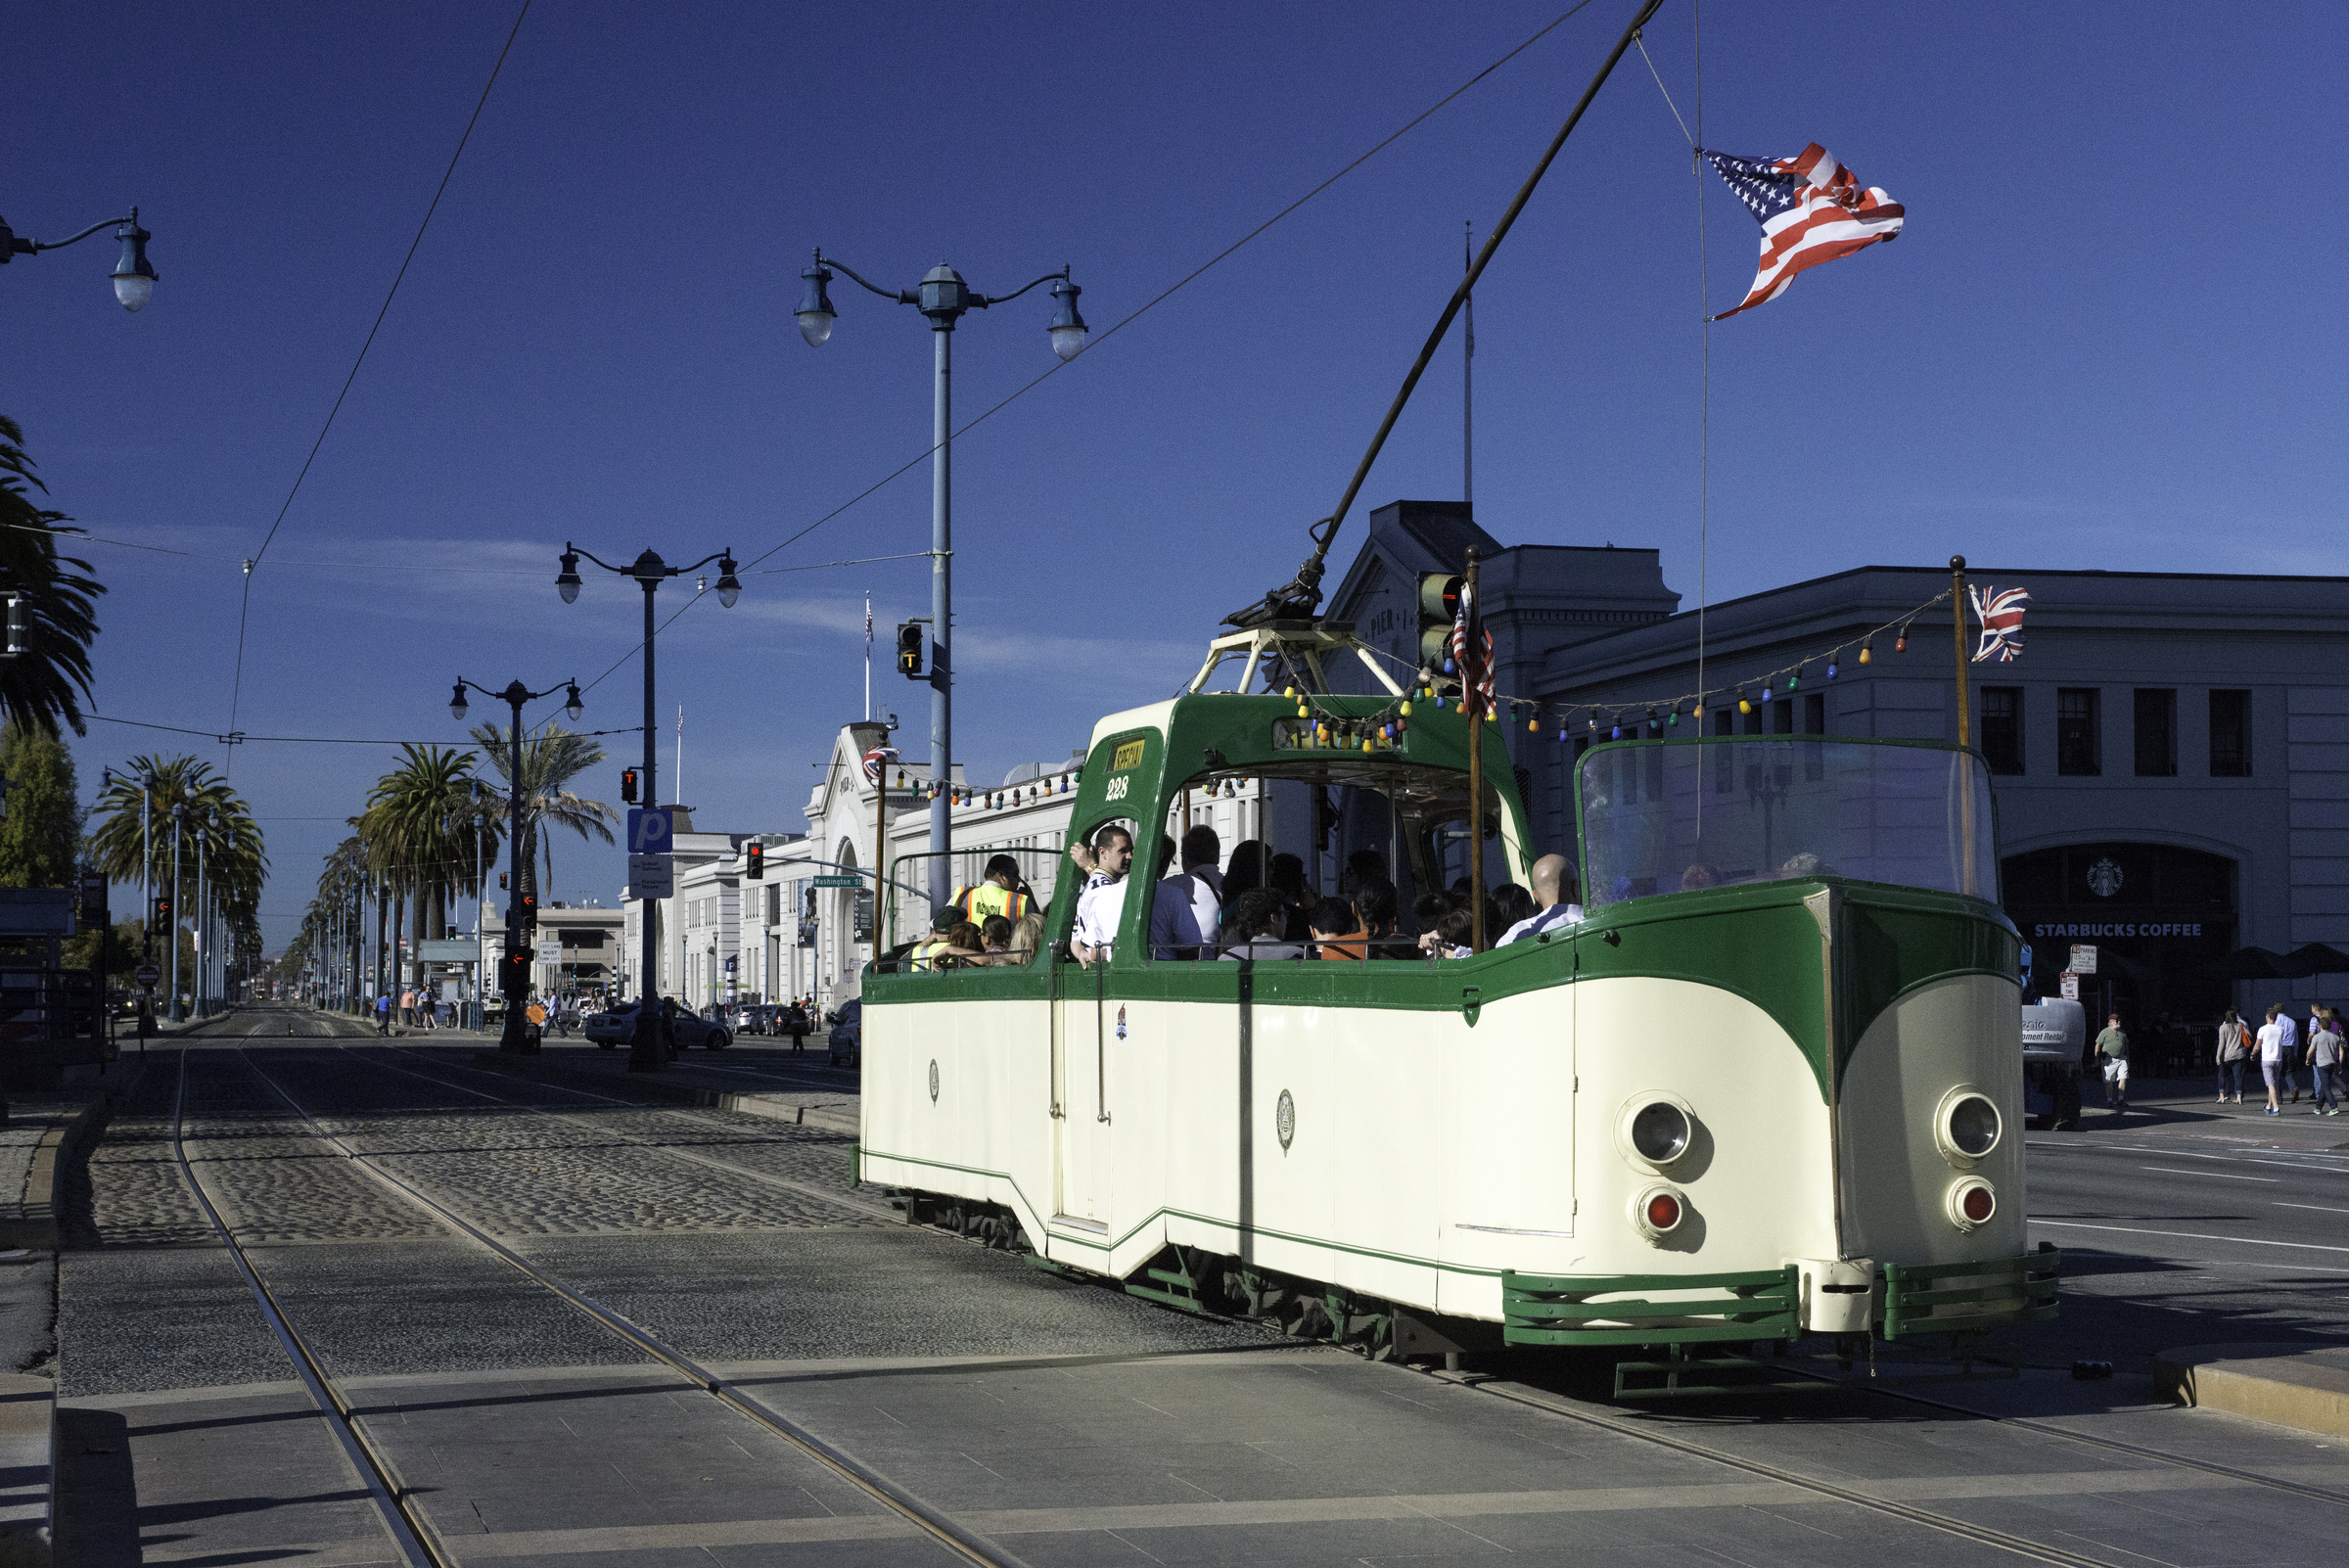 The open-top boatcar, #228, travels north on The Embarcadero with an American flag and a UK flag flying from the car and 